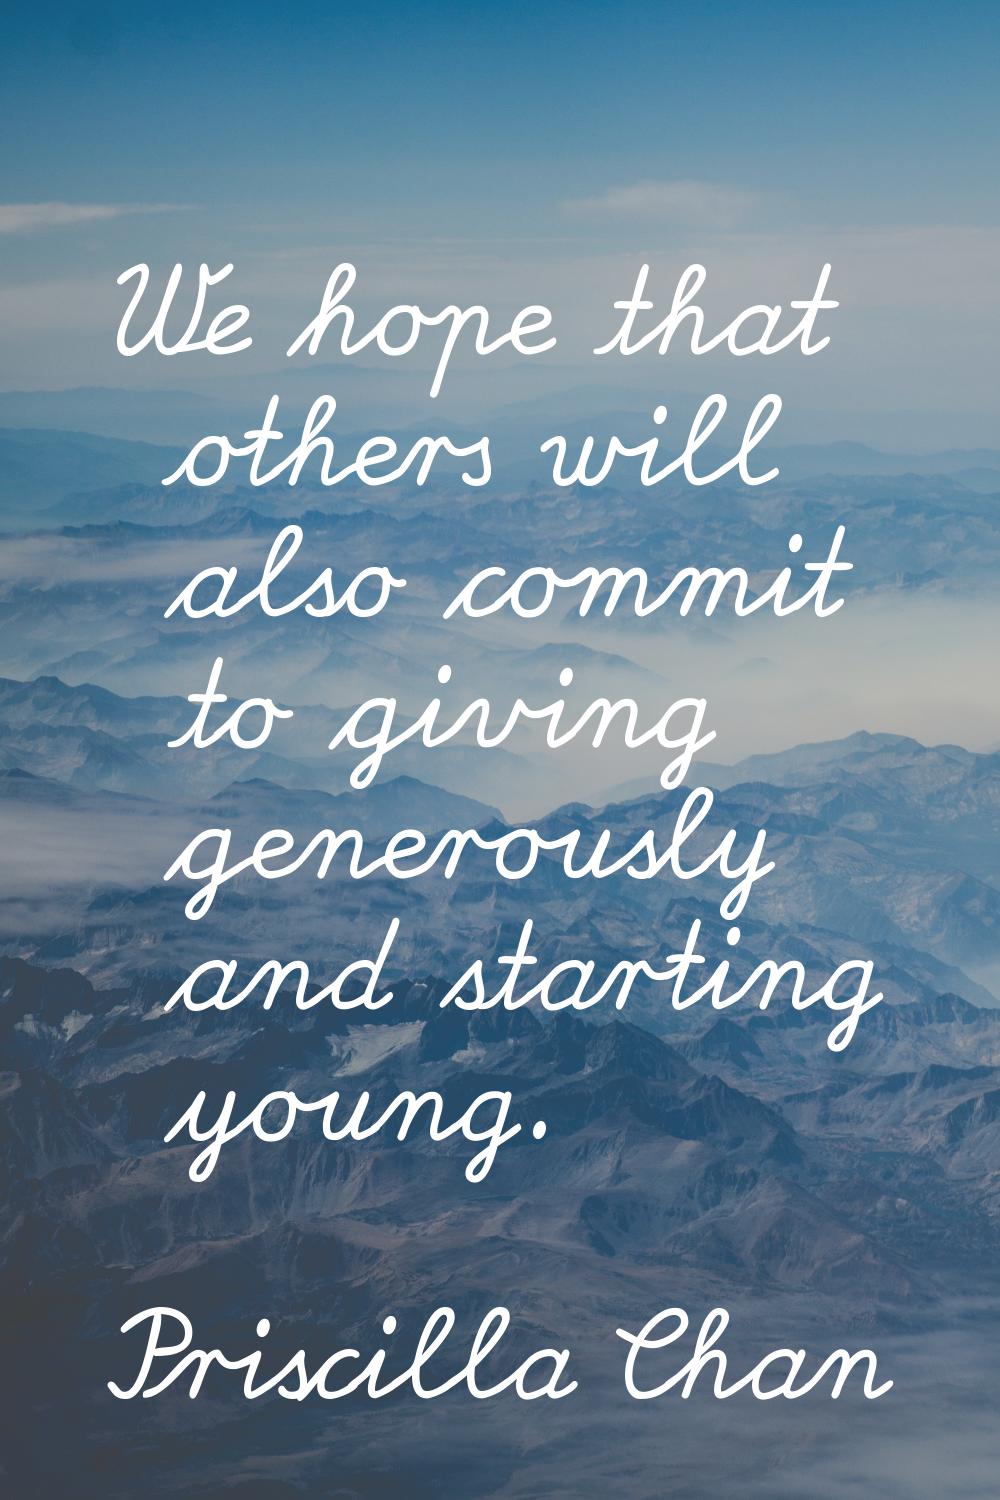 We hope that others will also commit to giving generously and starting young.